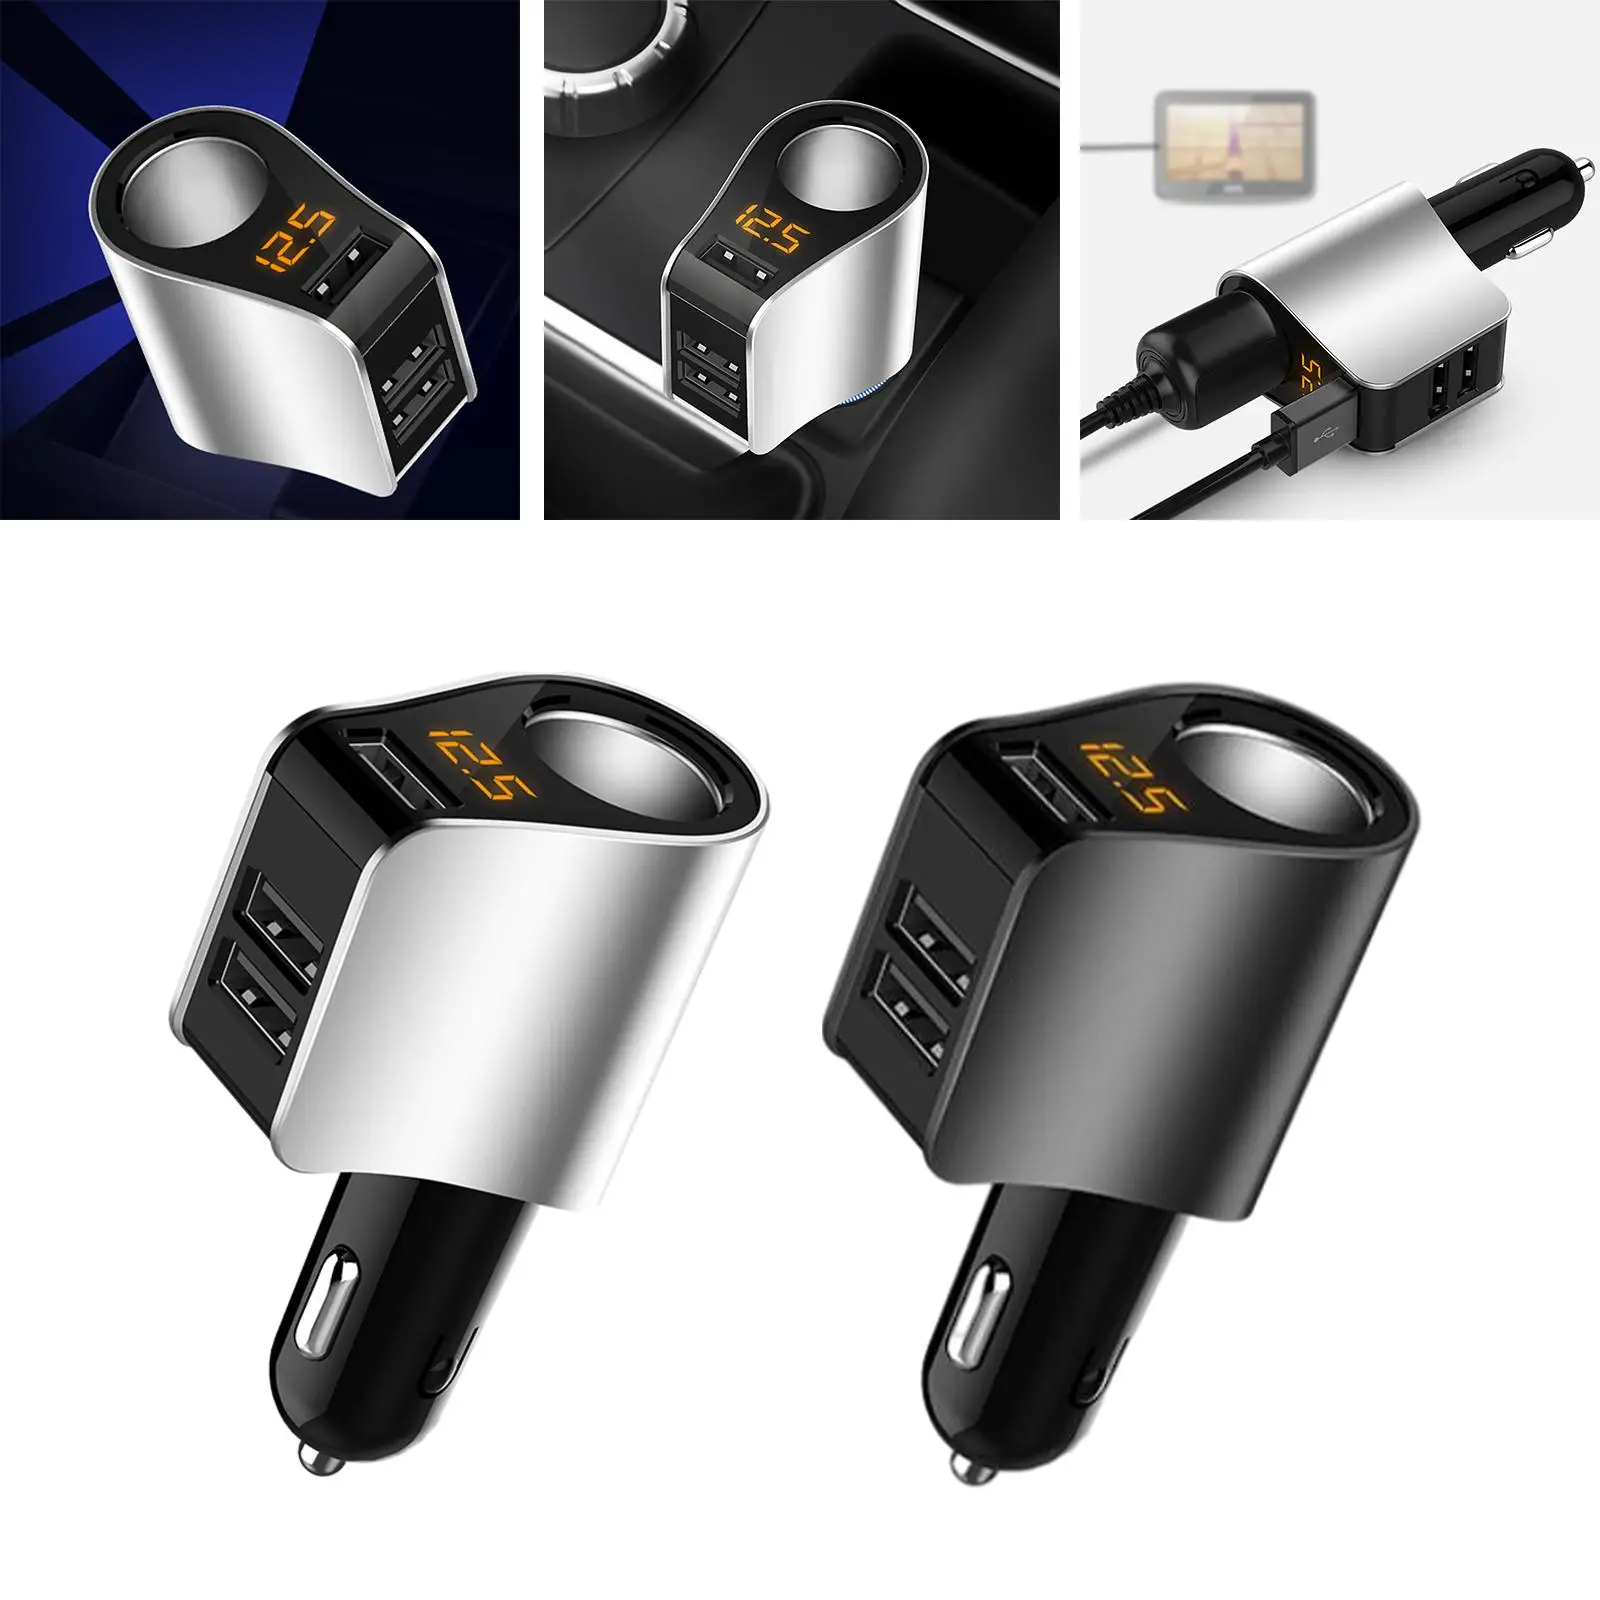 4 in 1 Fast Car Charger Fast Charging 12V-24V Universal Cigarette Lighter Adapter Fit for Mobile Phone Digital Products Truck